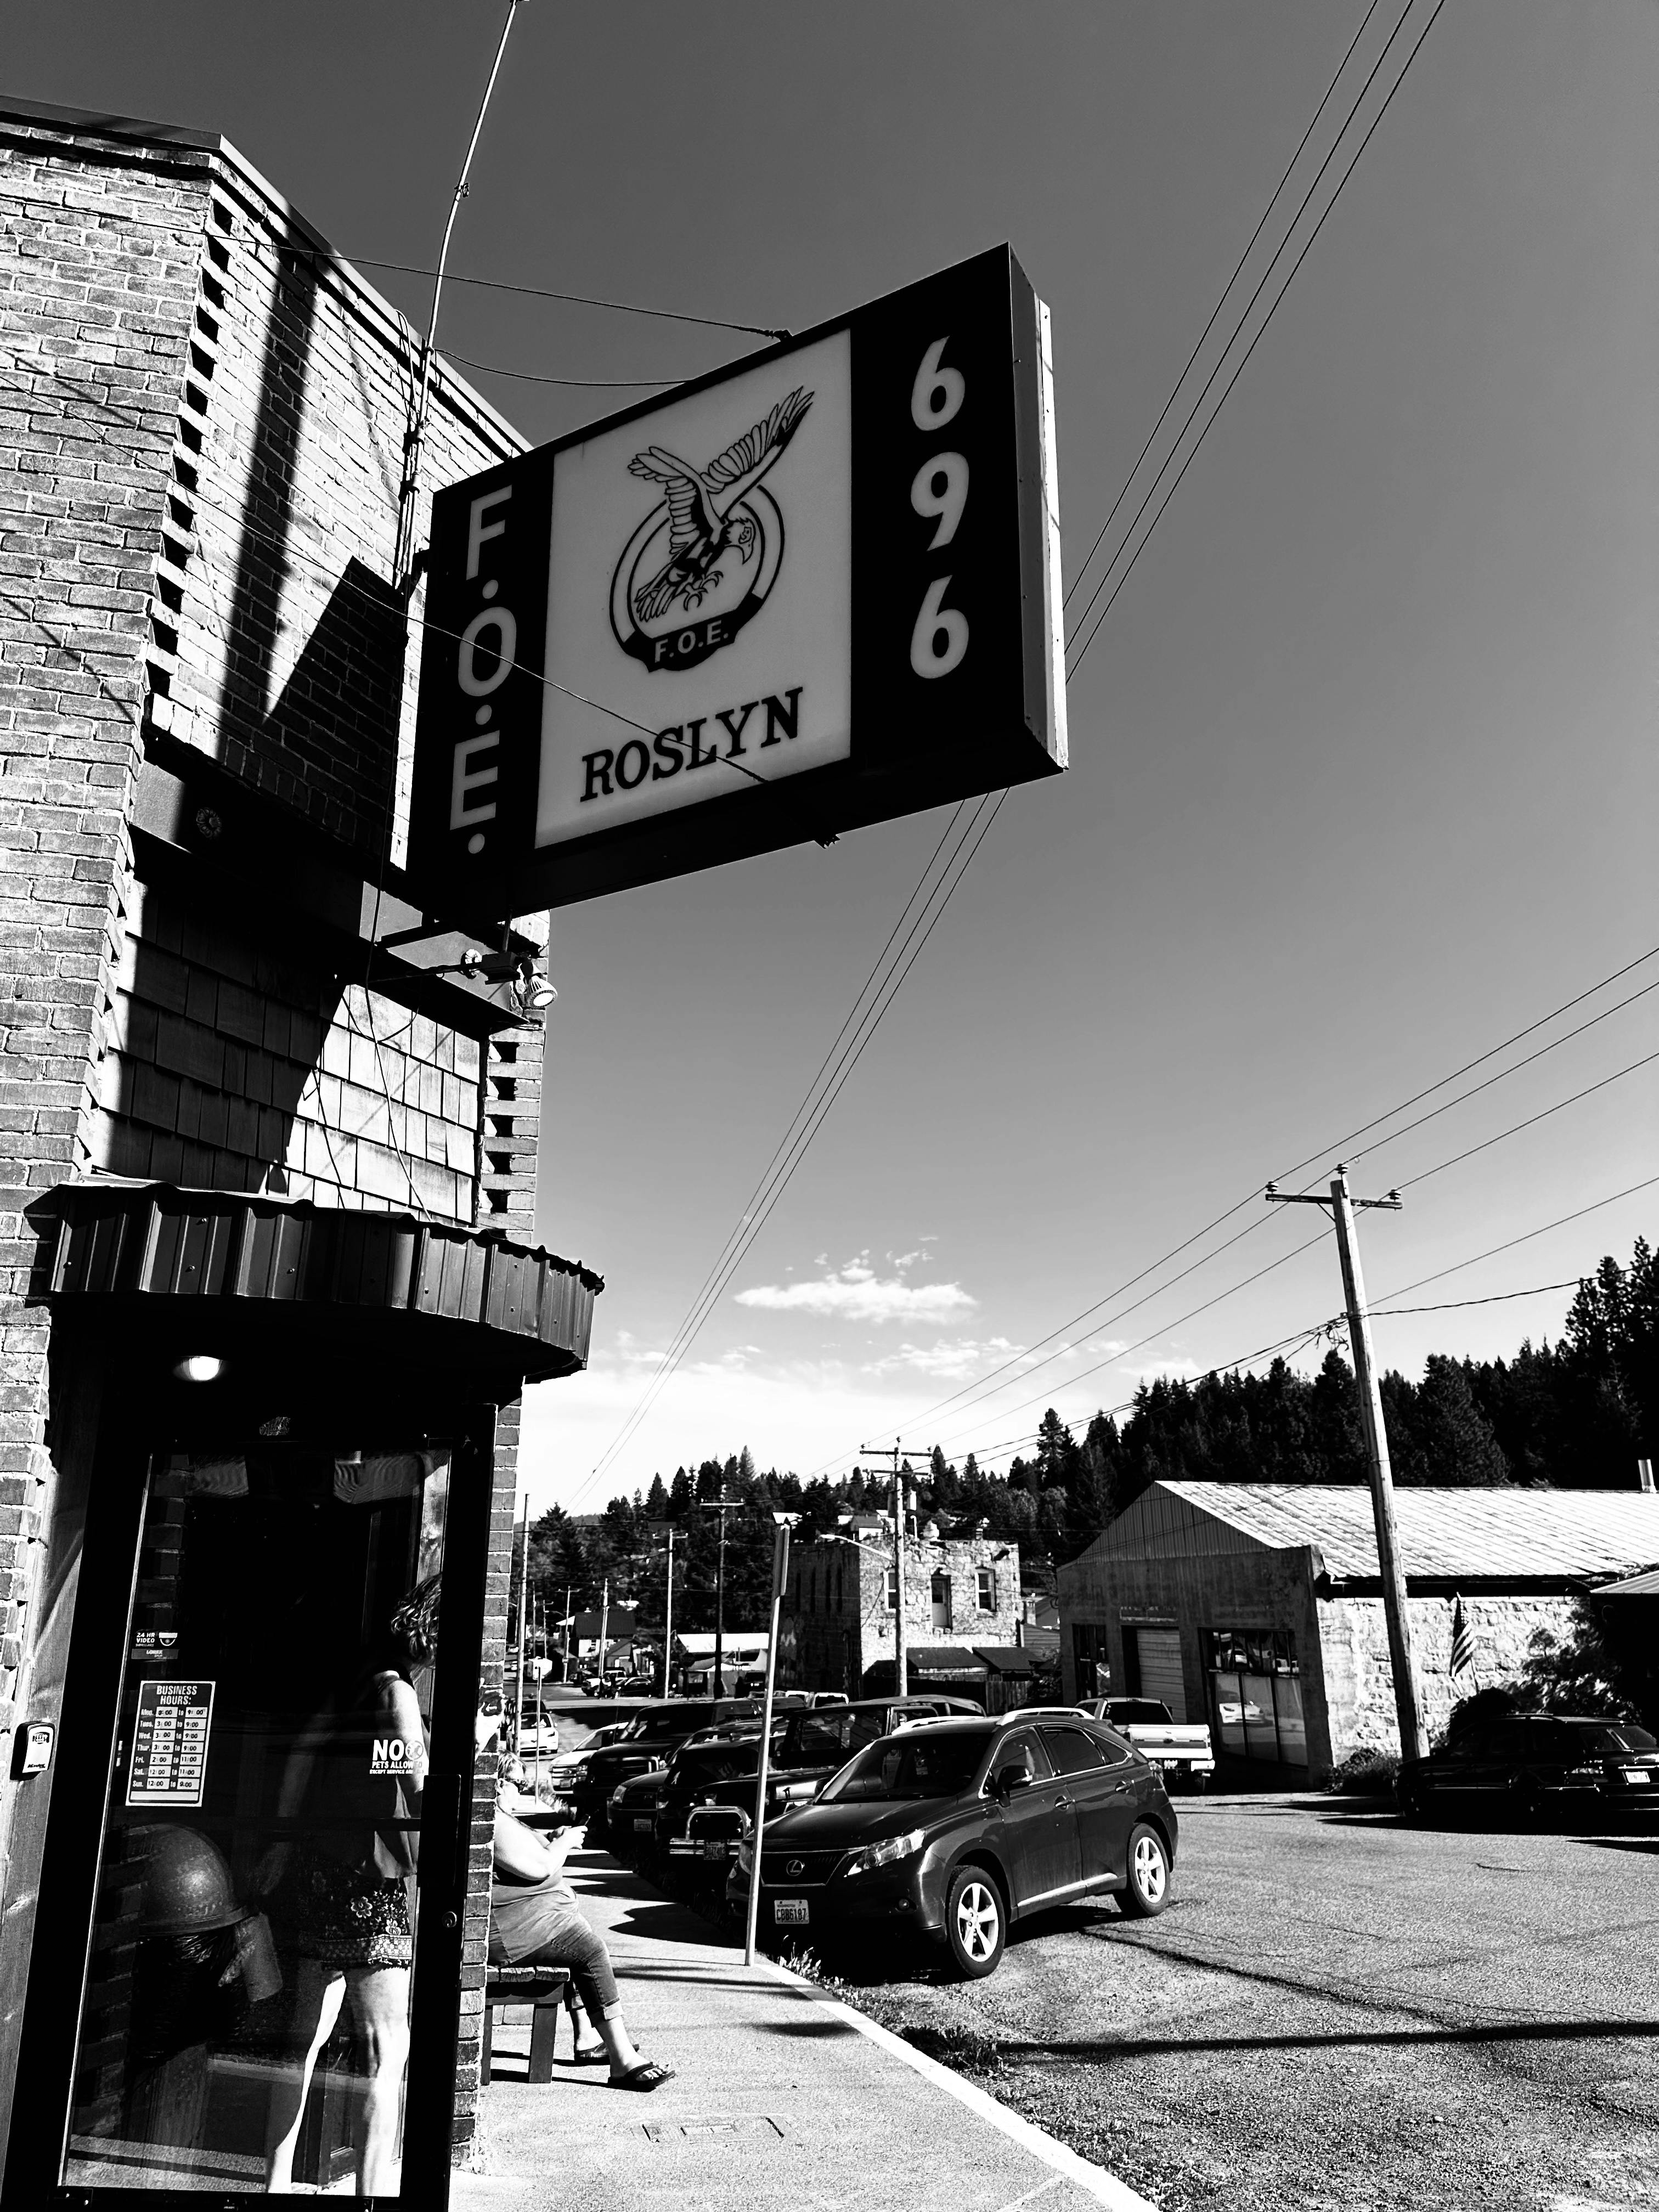 The local Eagles lodge in Roslyn, W.A. If you want to find the heart of a community, visit the lodges, clubs, diners and coffeeshops and simply listen.